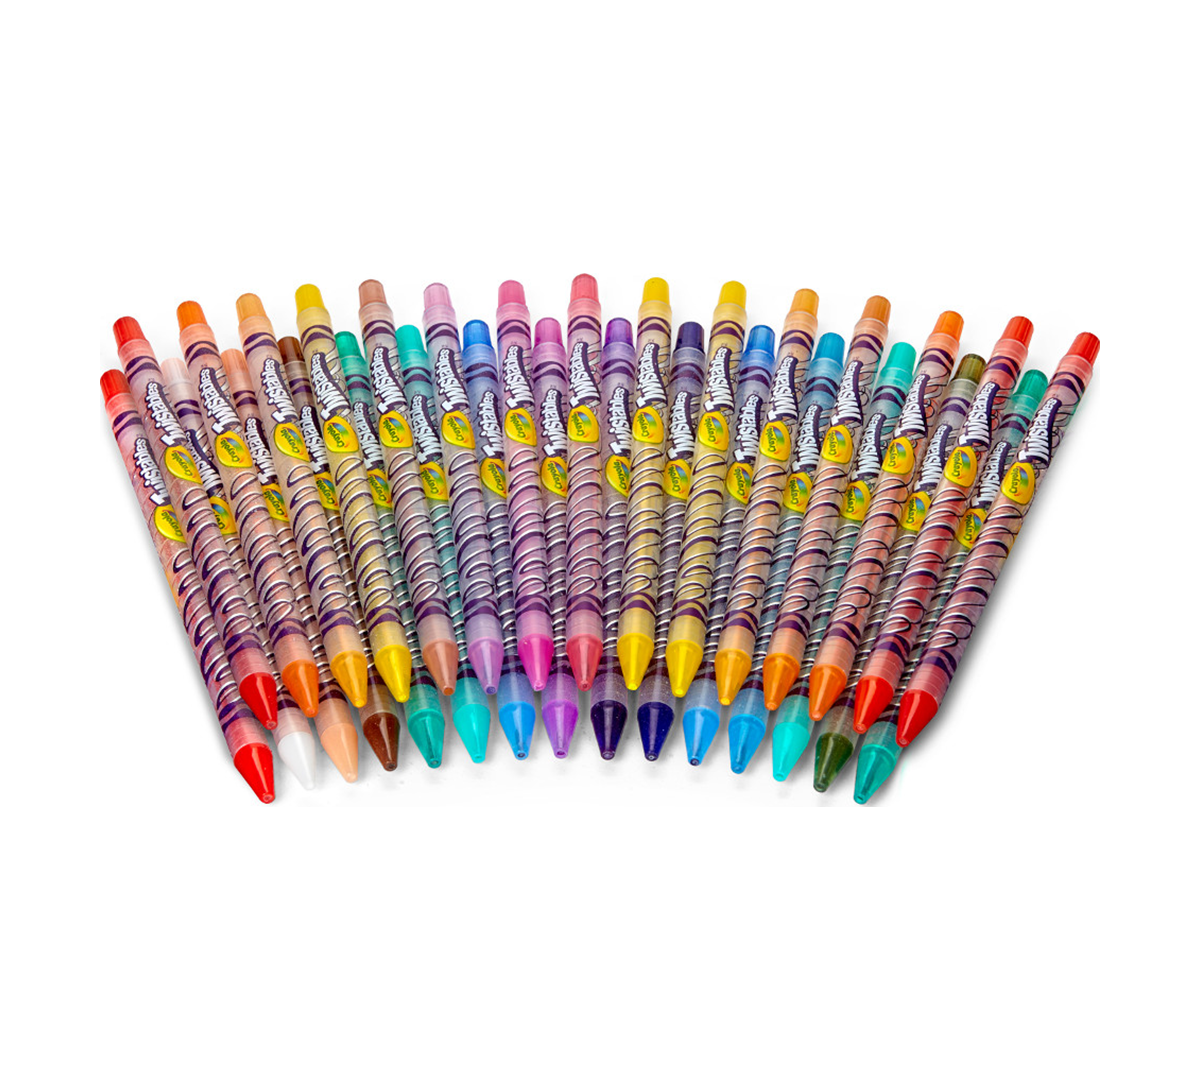 Crayola Twistables Colored Pencils Pack of 30 Pack of 2